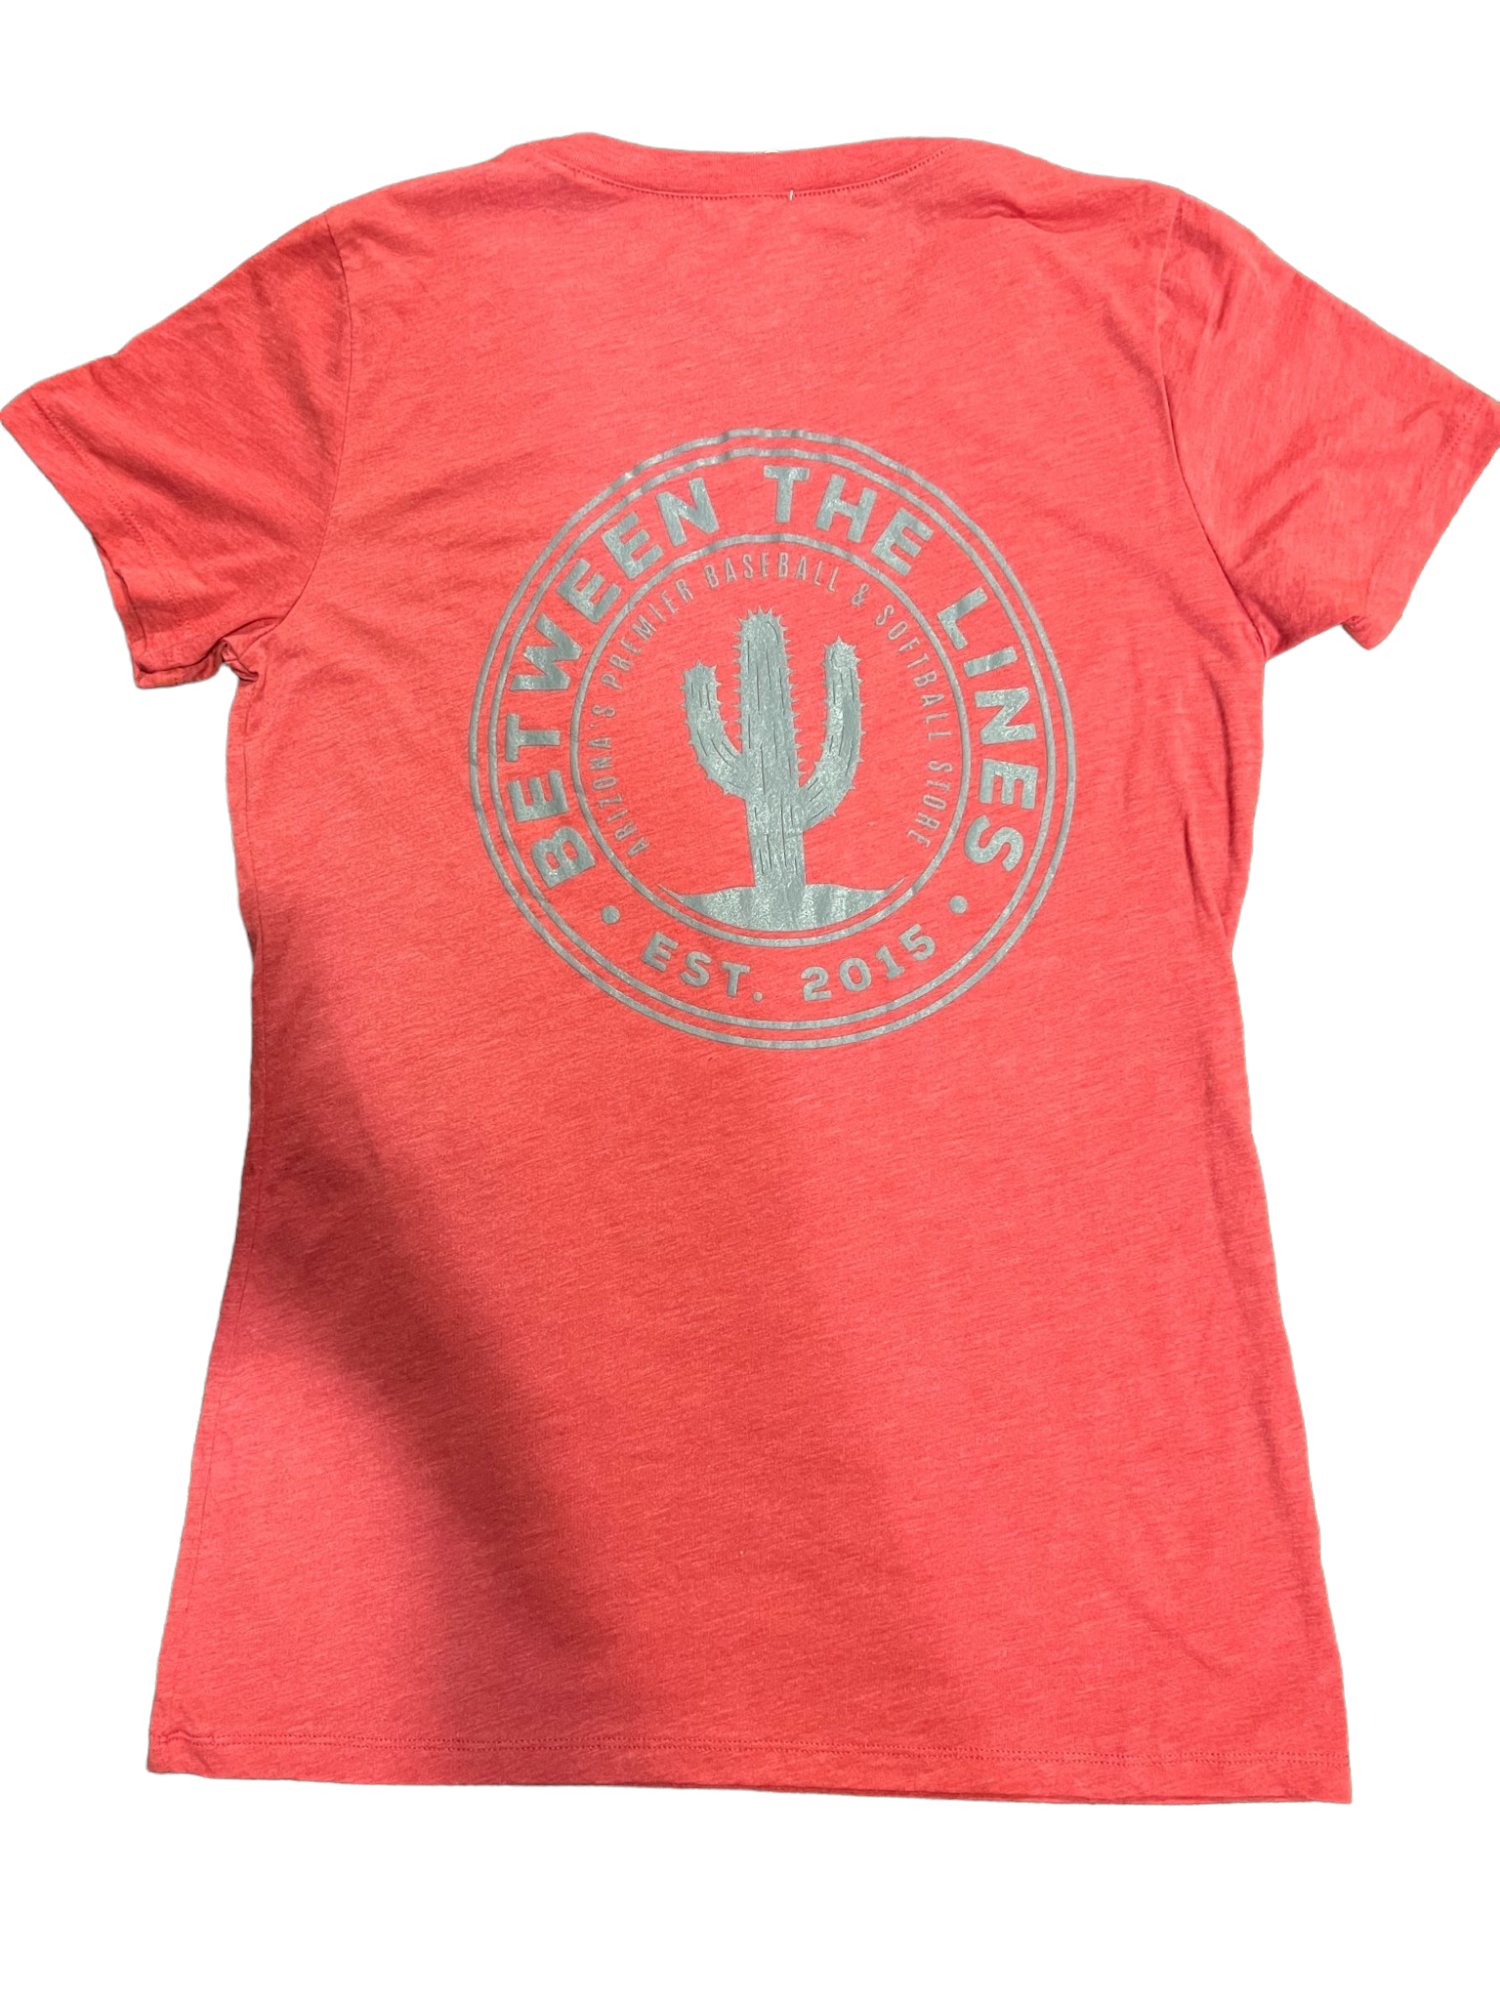 Between The Lines Womens Cactus T-Shirt